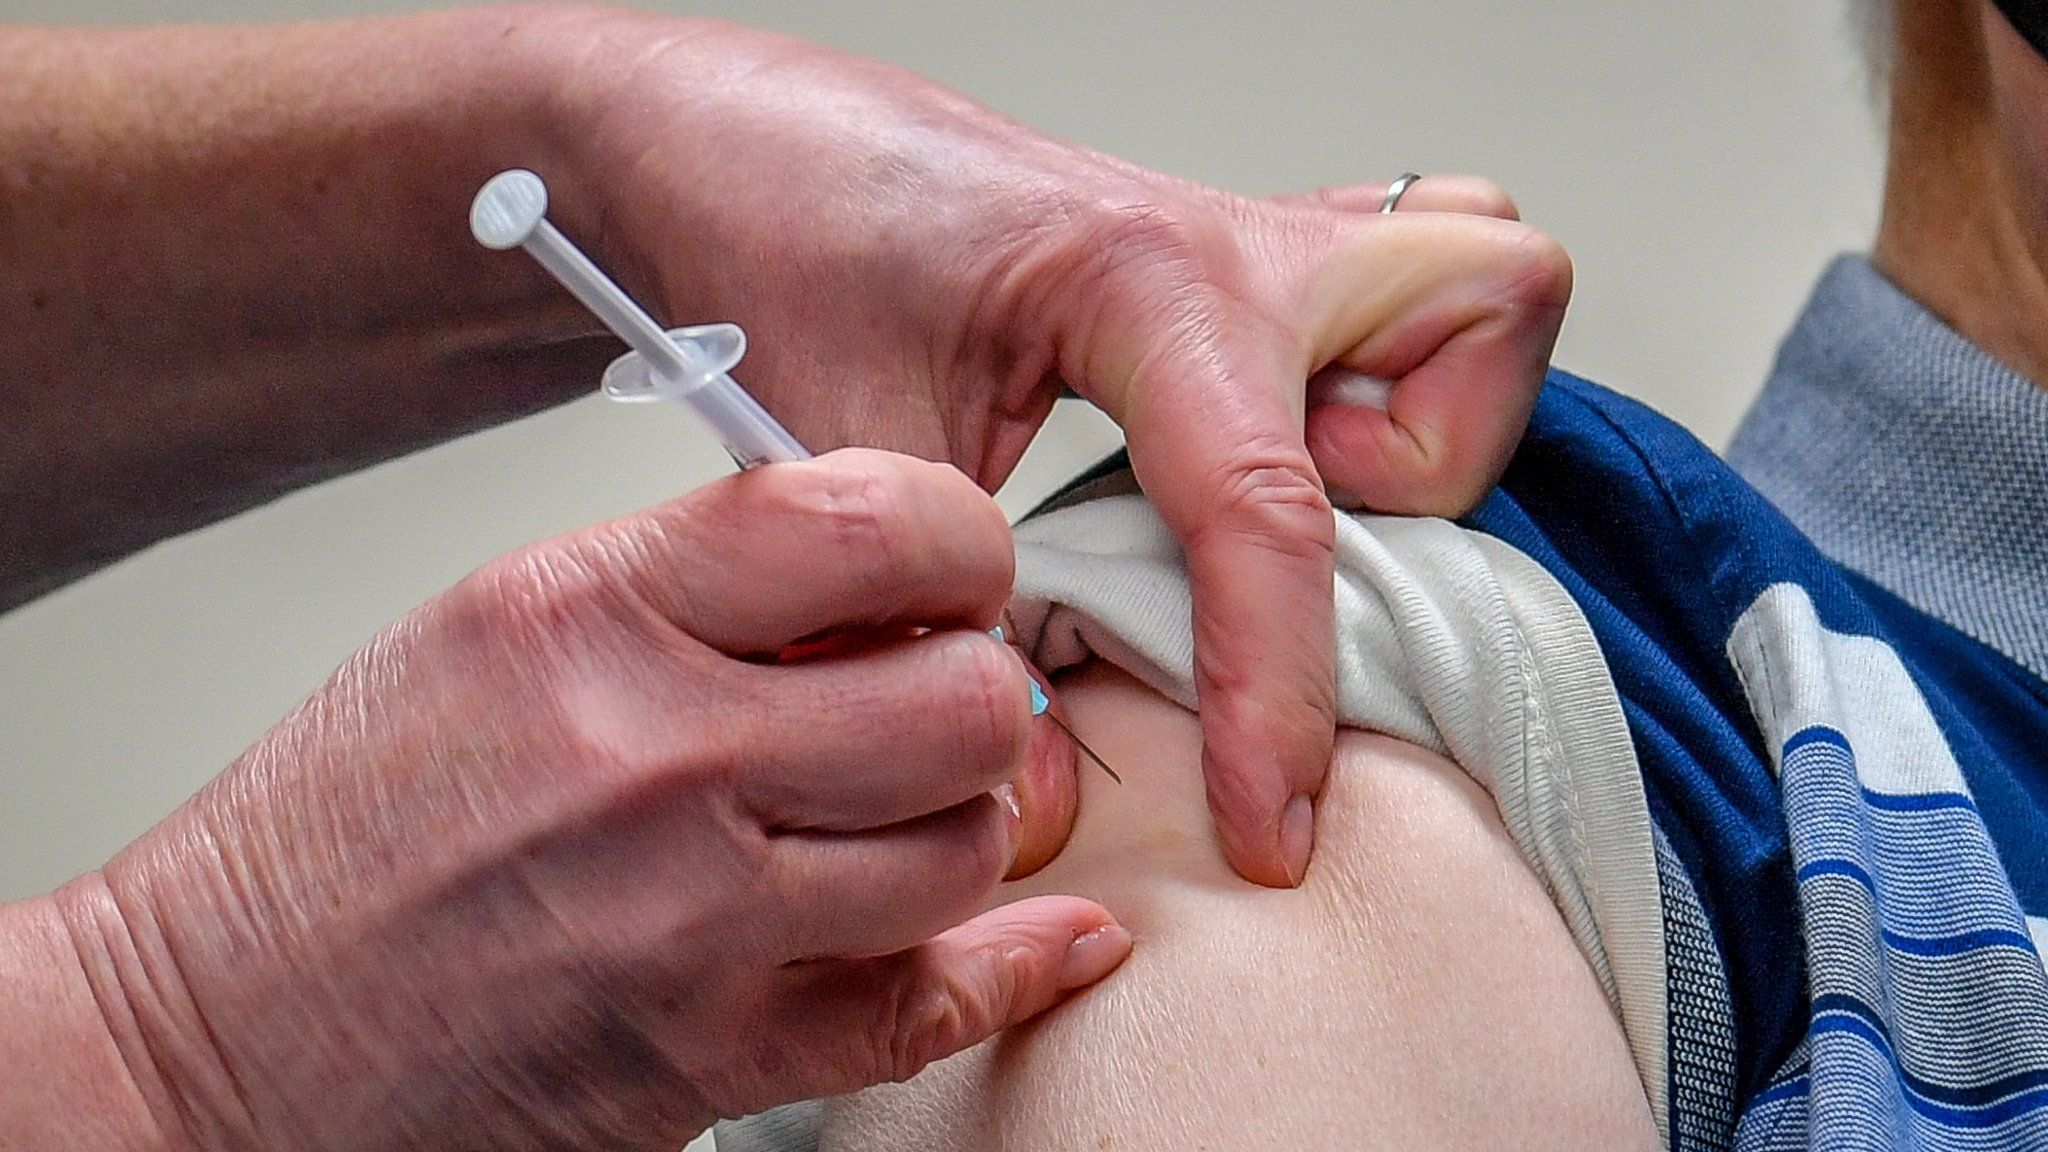 A patient receives the Astra Zeneca/Oxford University Covid-19 vaccine in Merthyr Tydfil